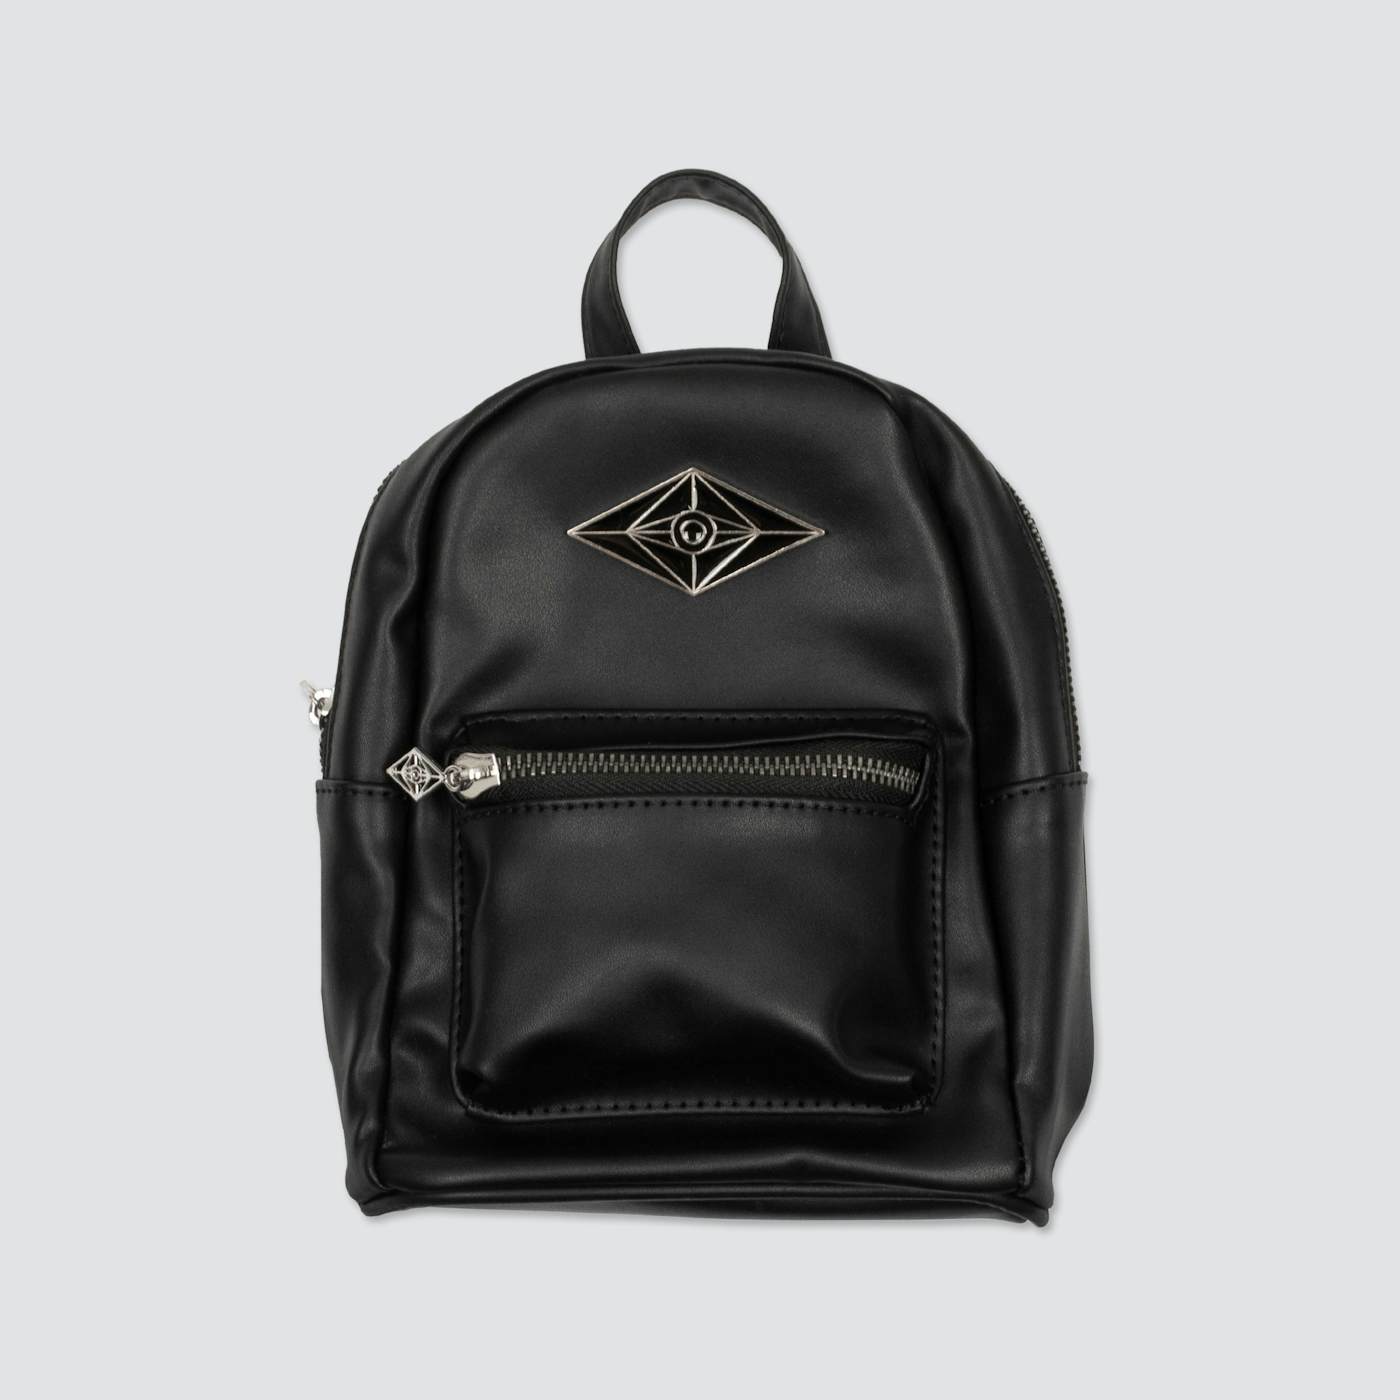 Clapton Backpack Club